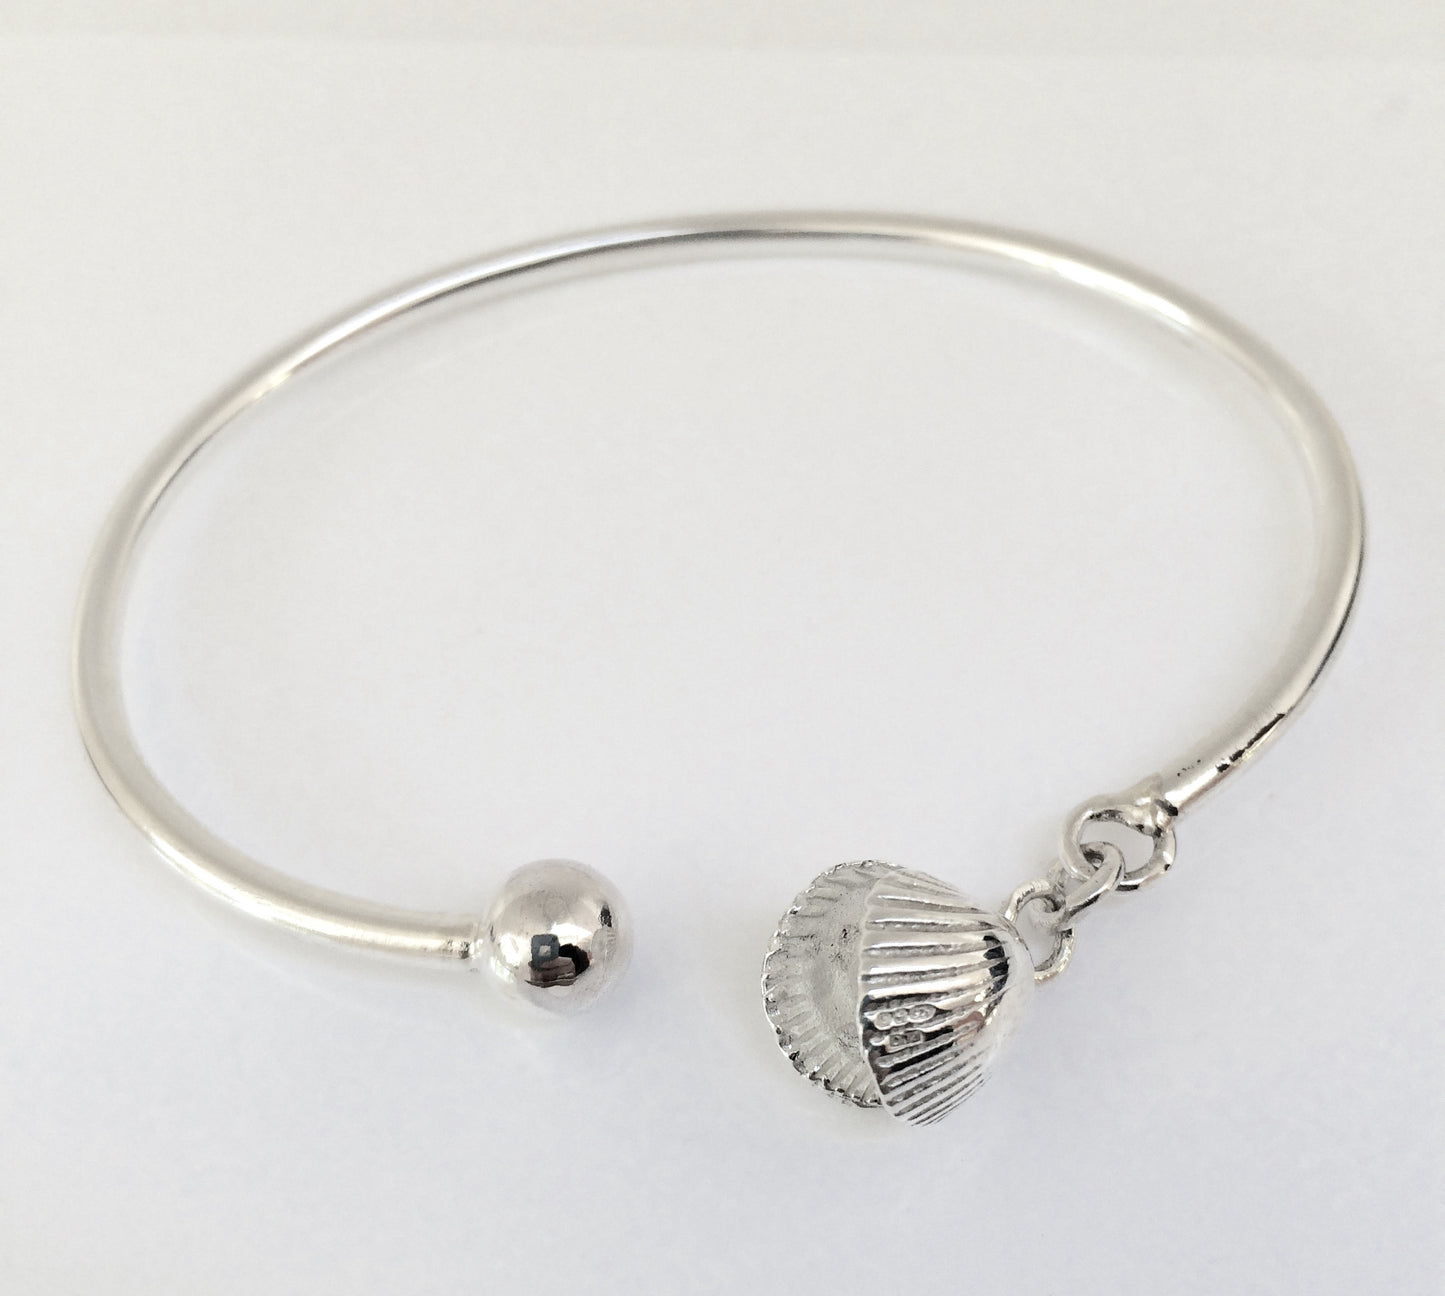 Silver cockle shell clasp bangle